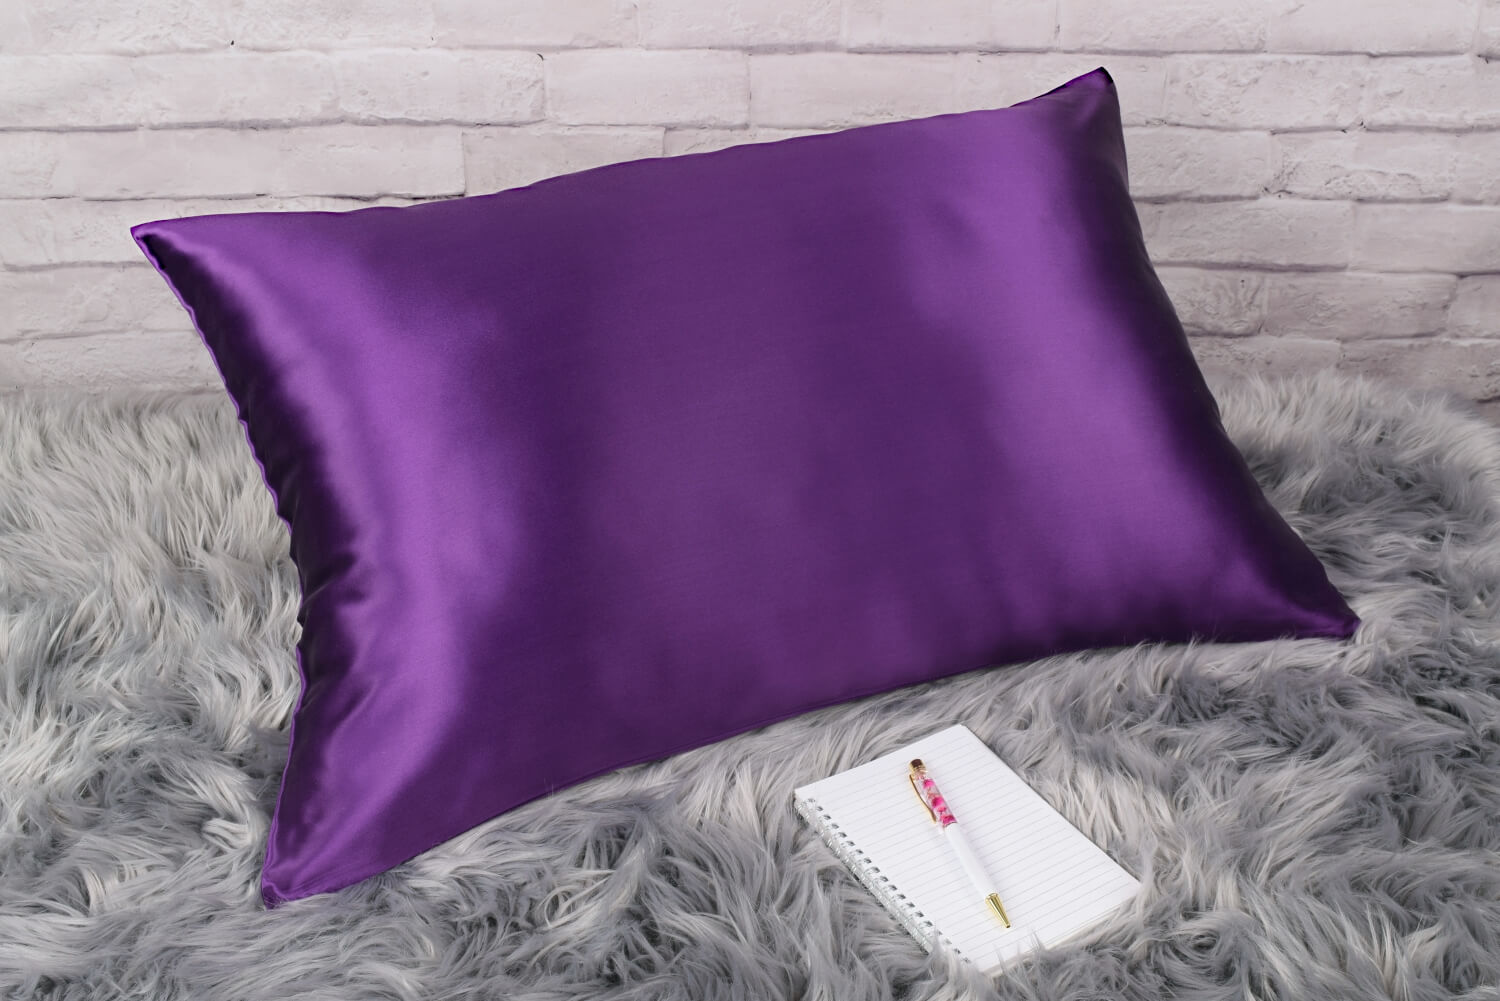 Celestial Silk 25 momme plum silk pillowcase on faux fur rug with notebook and pretty pen